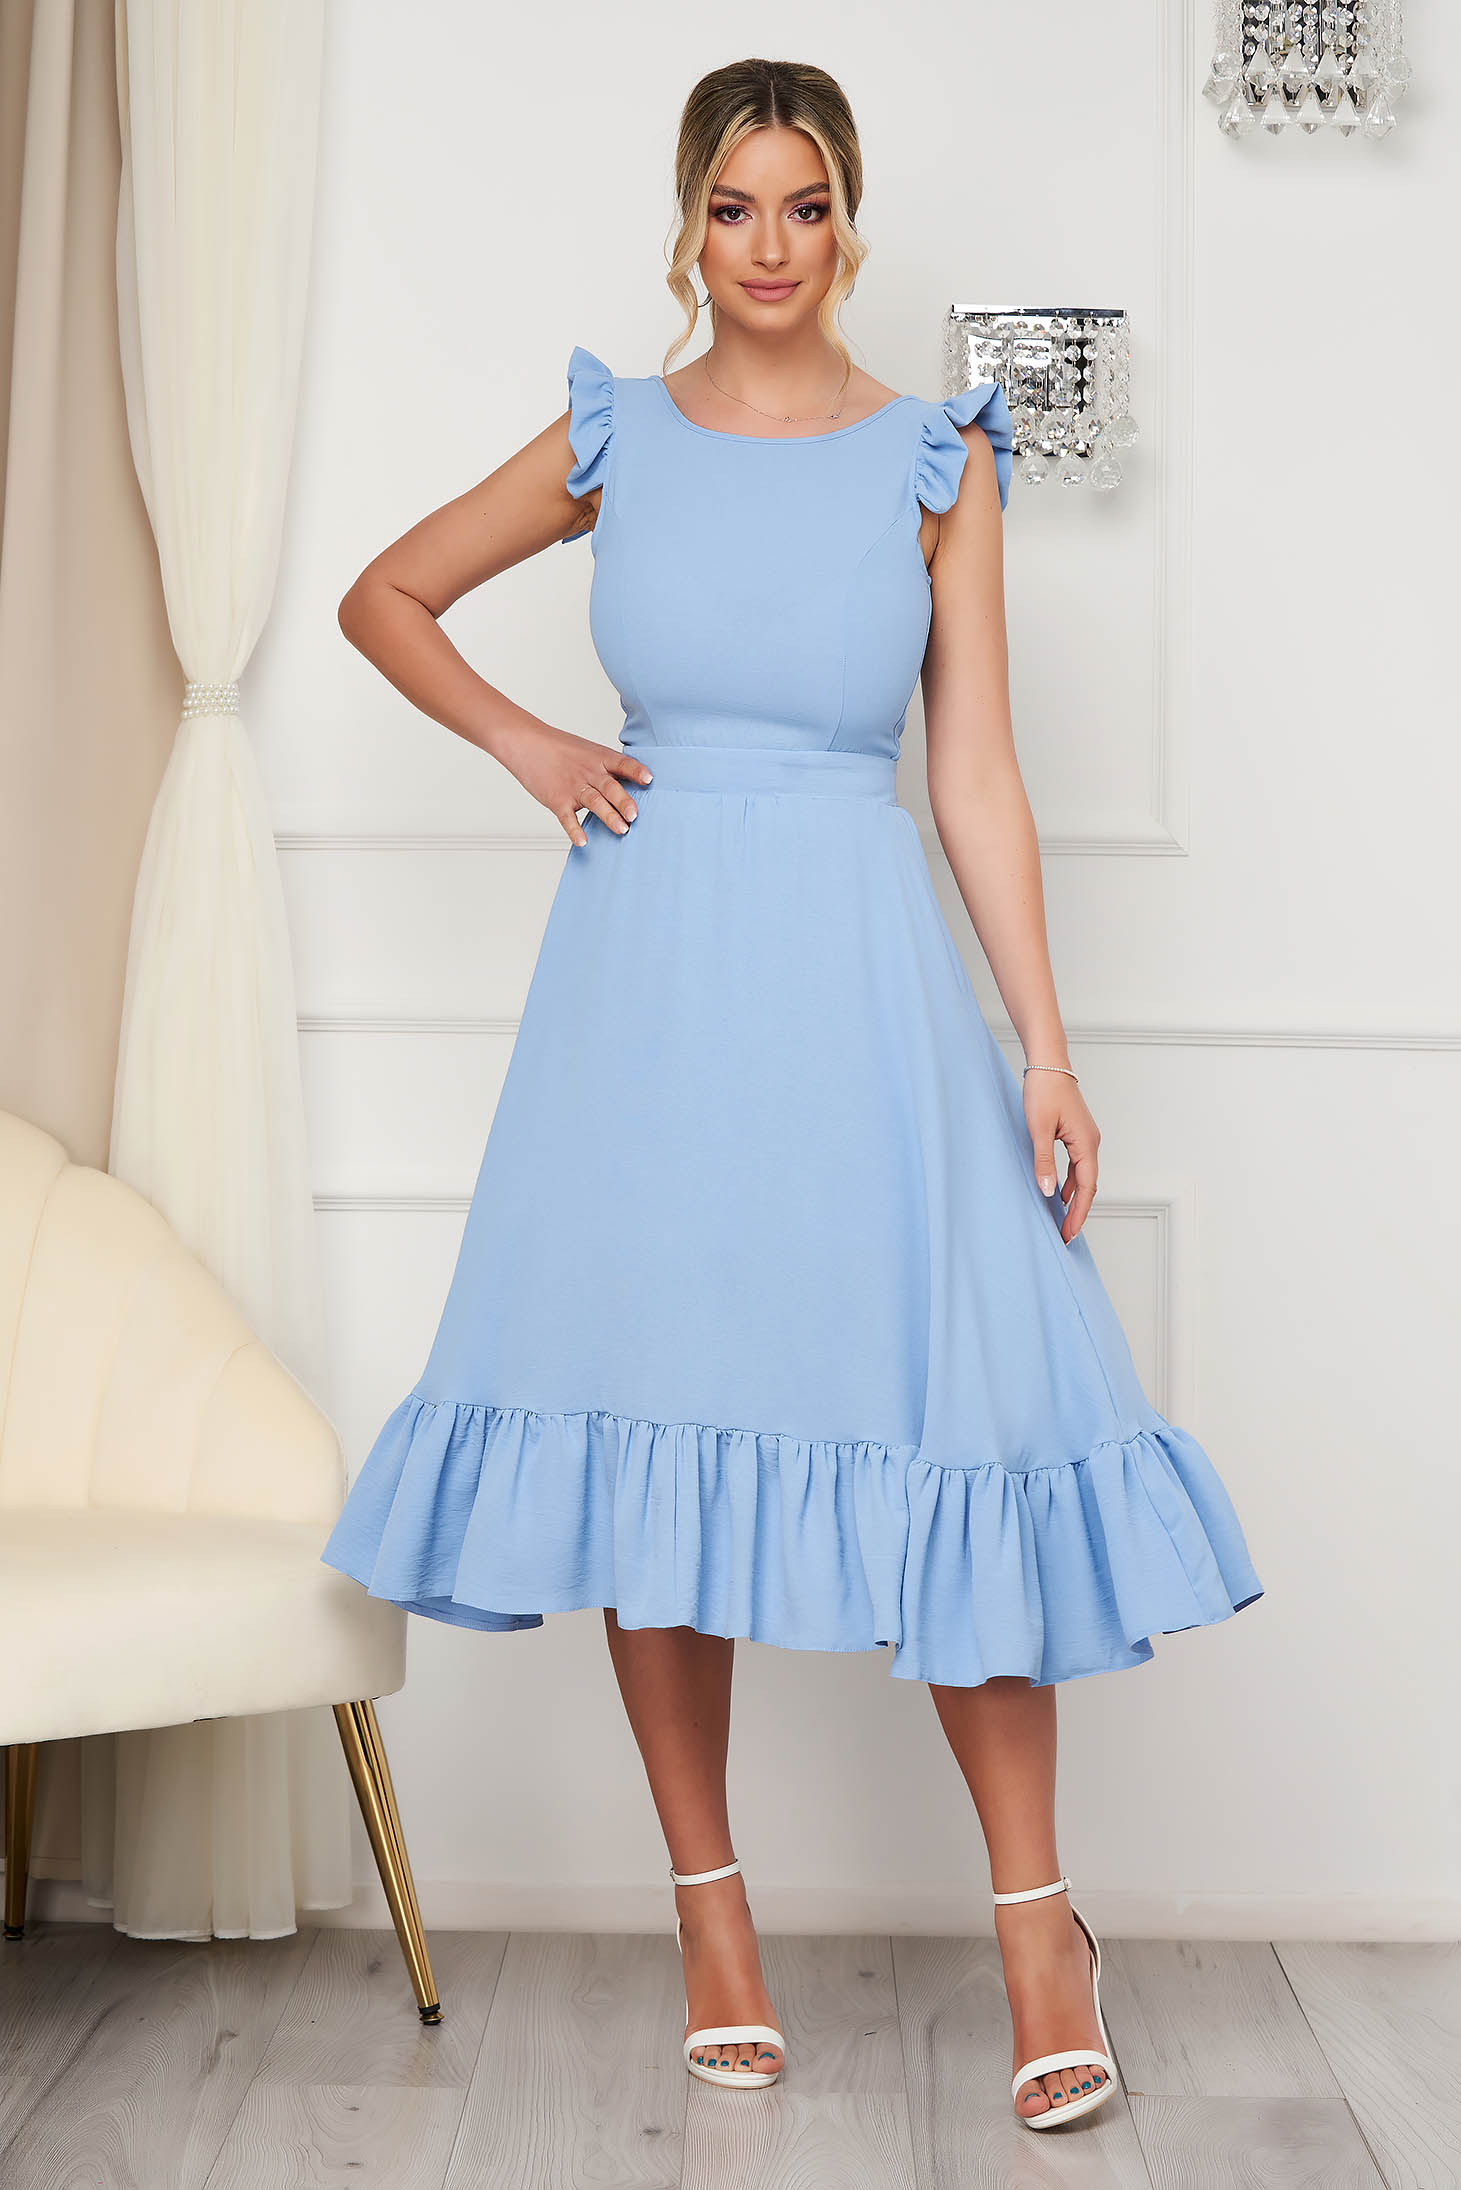 Light Material Type Midi Dress in Light Blue with Open Back - StarShinerS 2 - StarShinerS.com